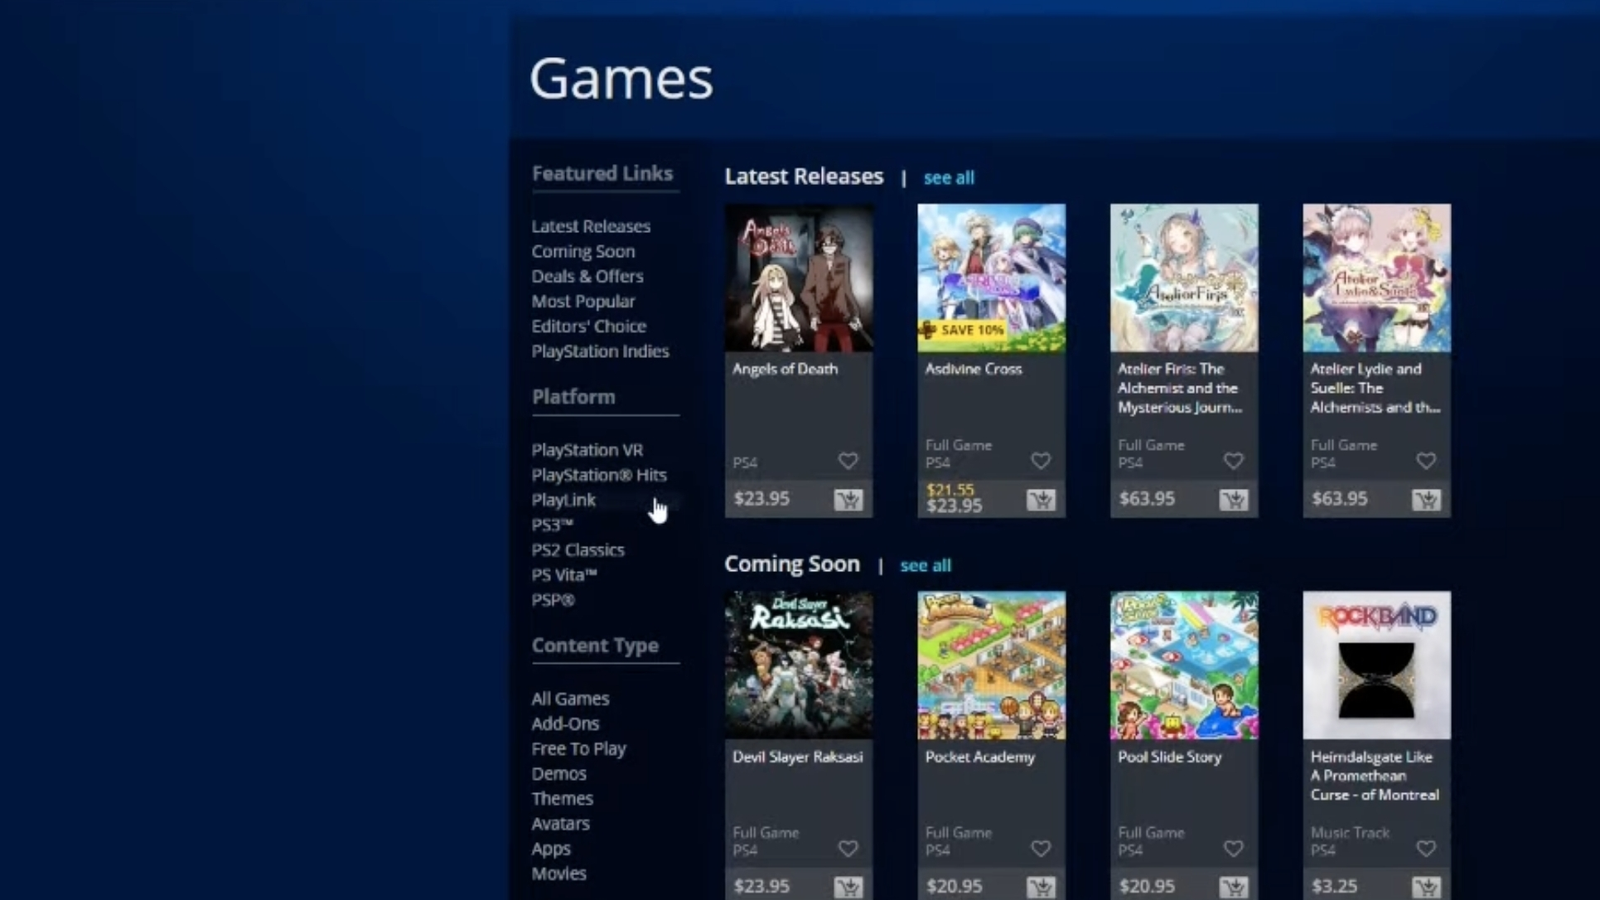 Here's how you can buy older, unlisted games on the PlayStation Store